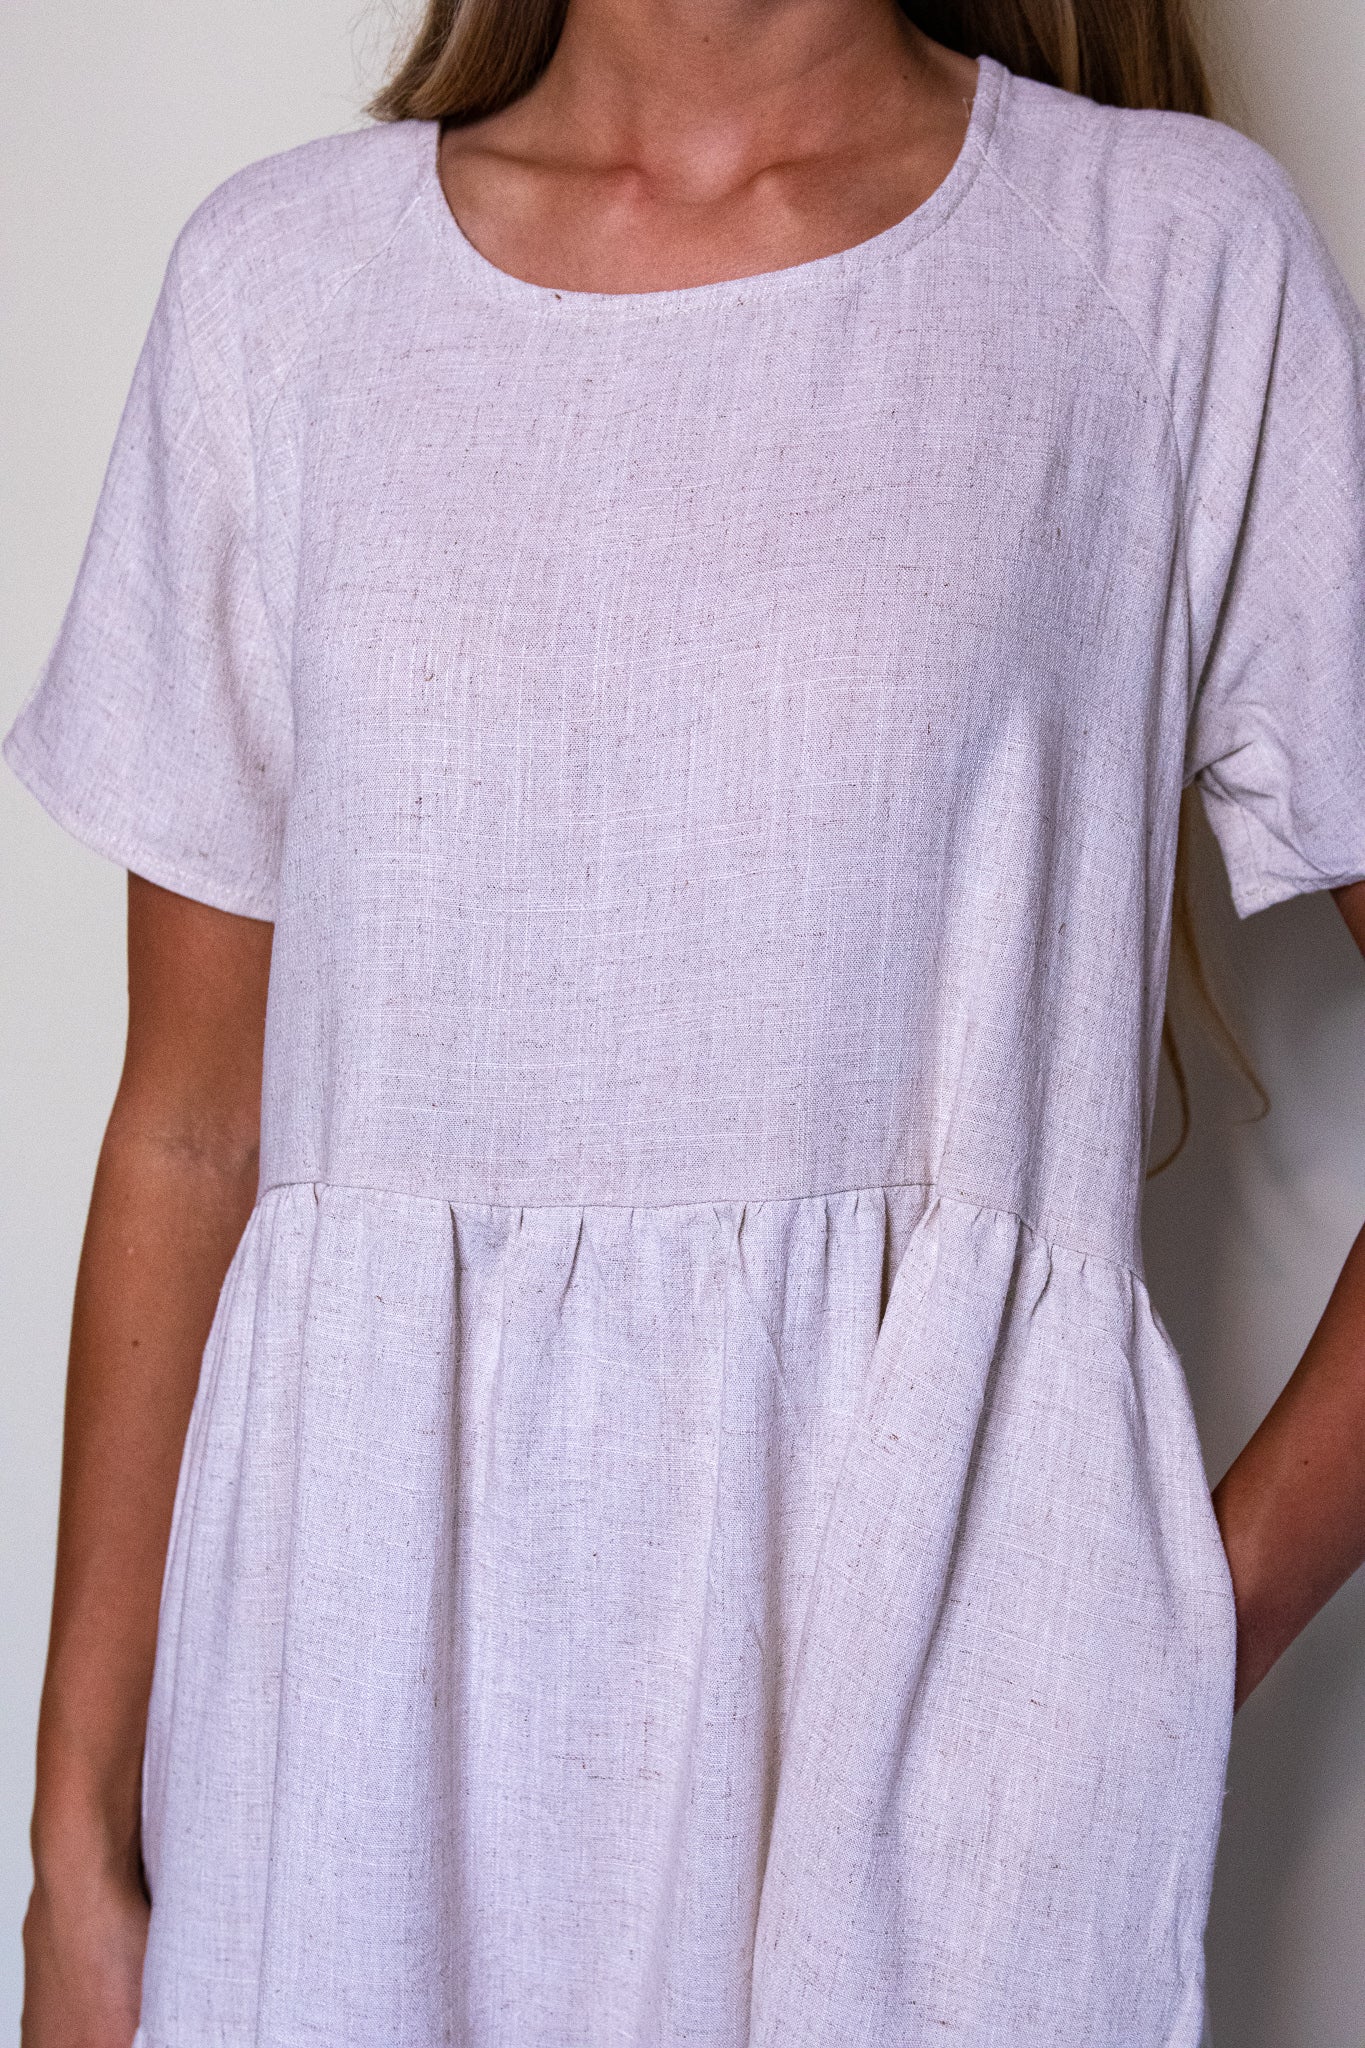 Tiered T-Shirt Dress - Kelly in the City